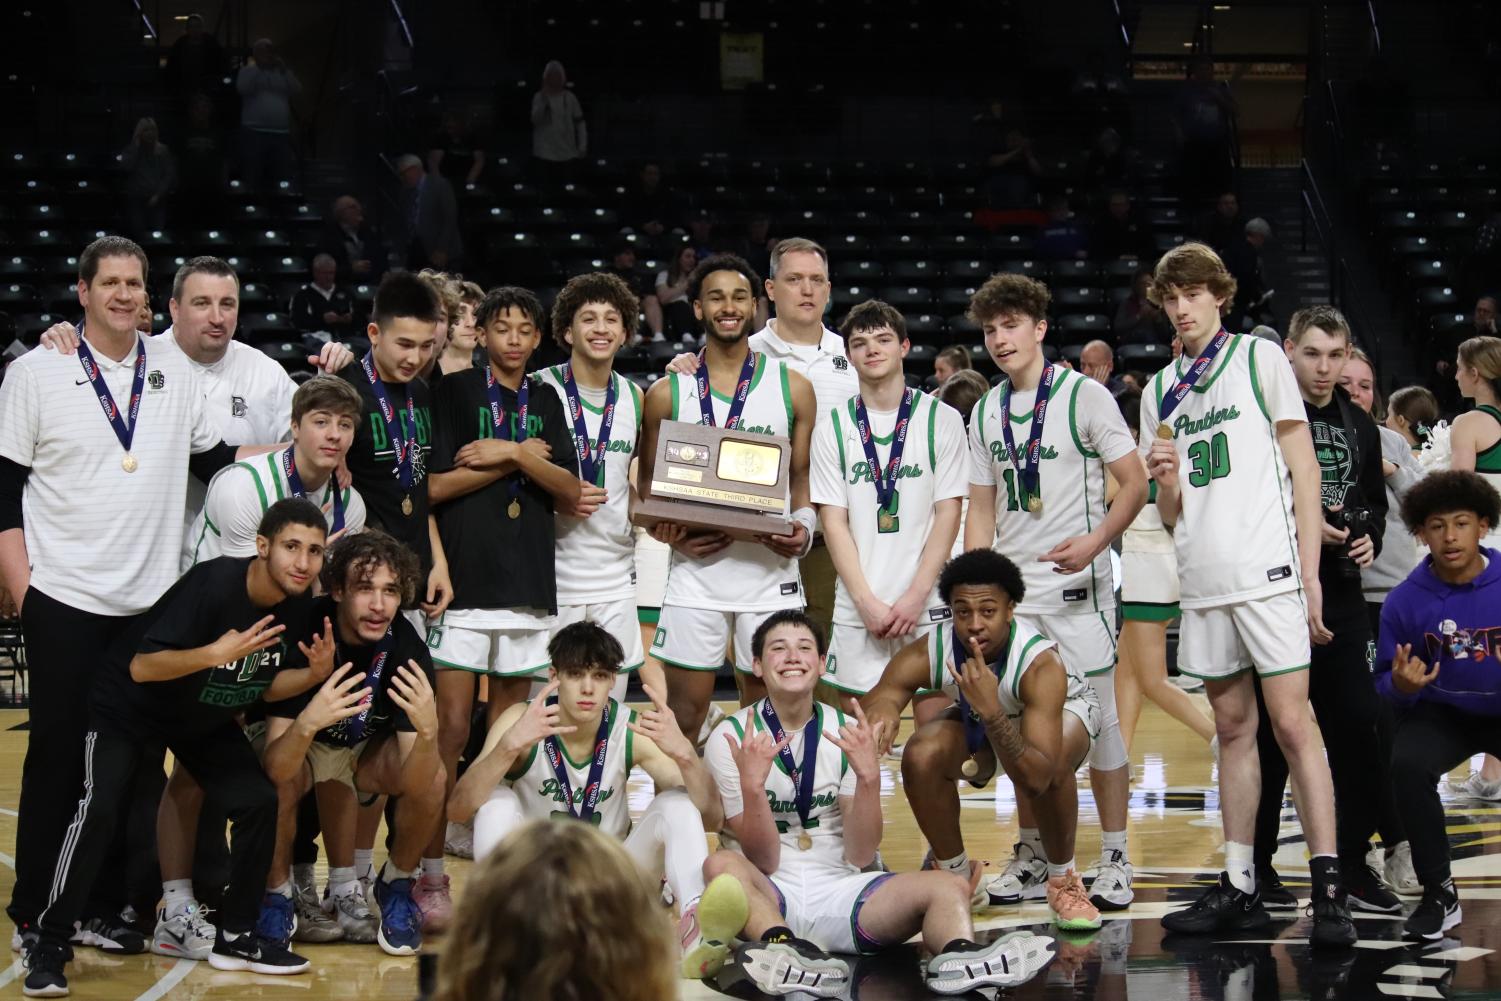 Boys+basketball+finishes+third+in+Class+6A+in+overtime+thriller+%28Photos+by+Joselyn+Steele%29